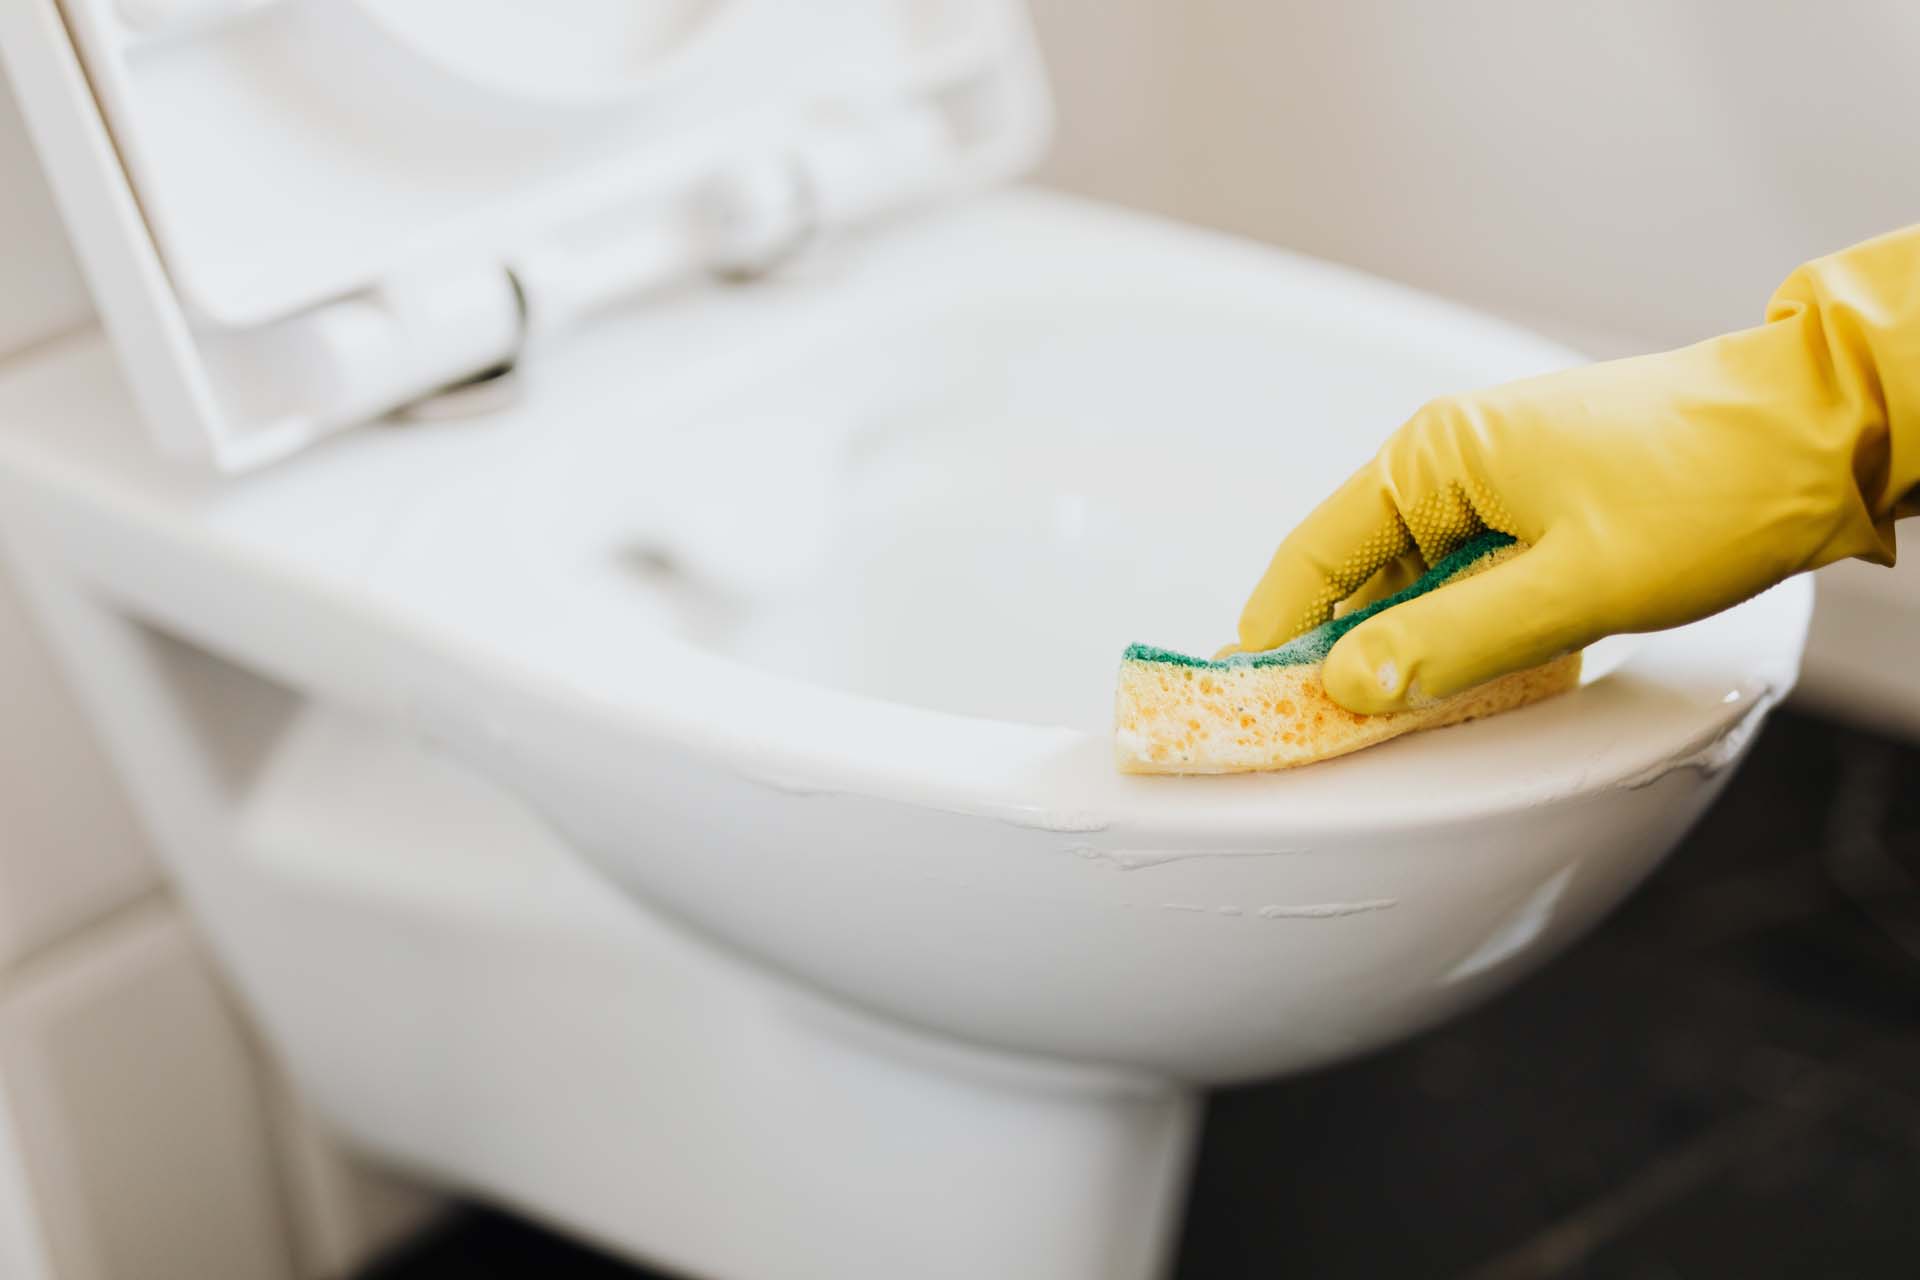 What Causes The Pink Ring In The Toilet Bowl